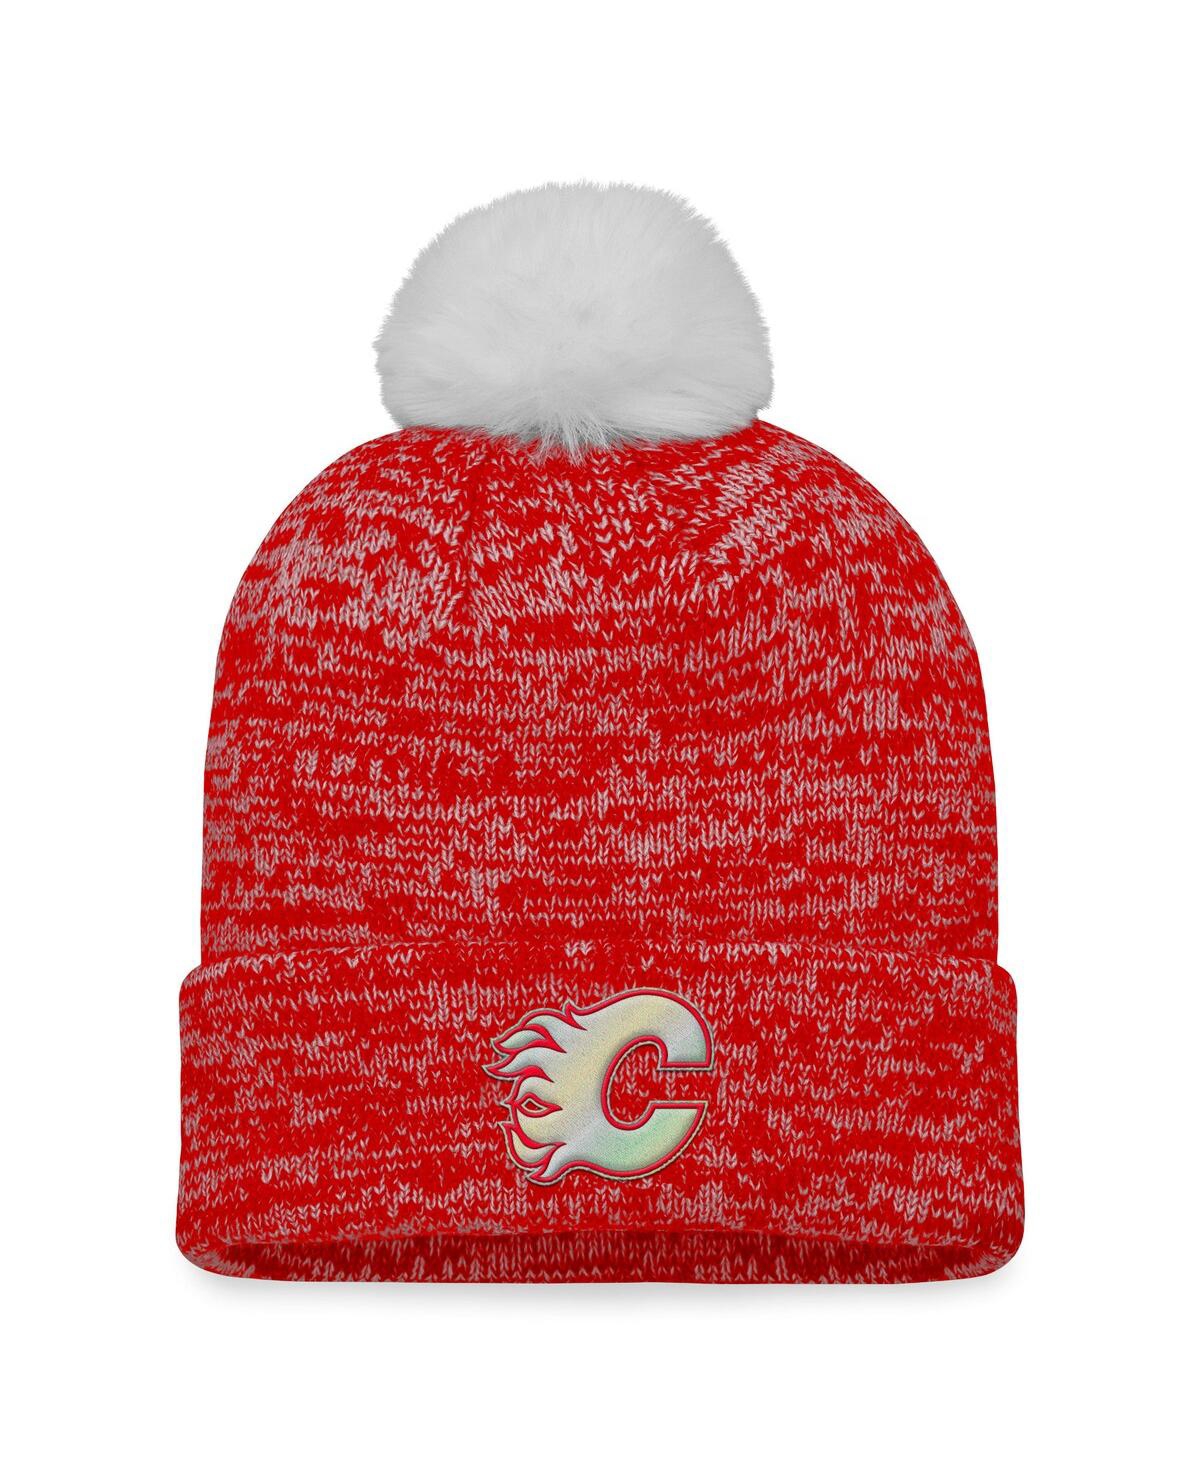 Women's Fanatics Red Calgary Flames Glimmer Cuffed Knit Hat with Pom - Red